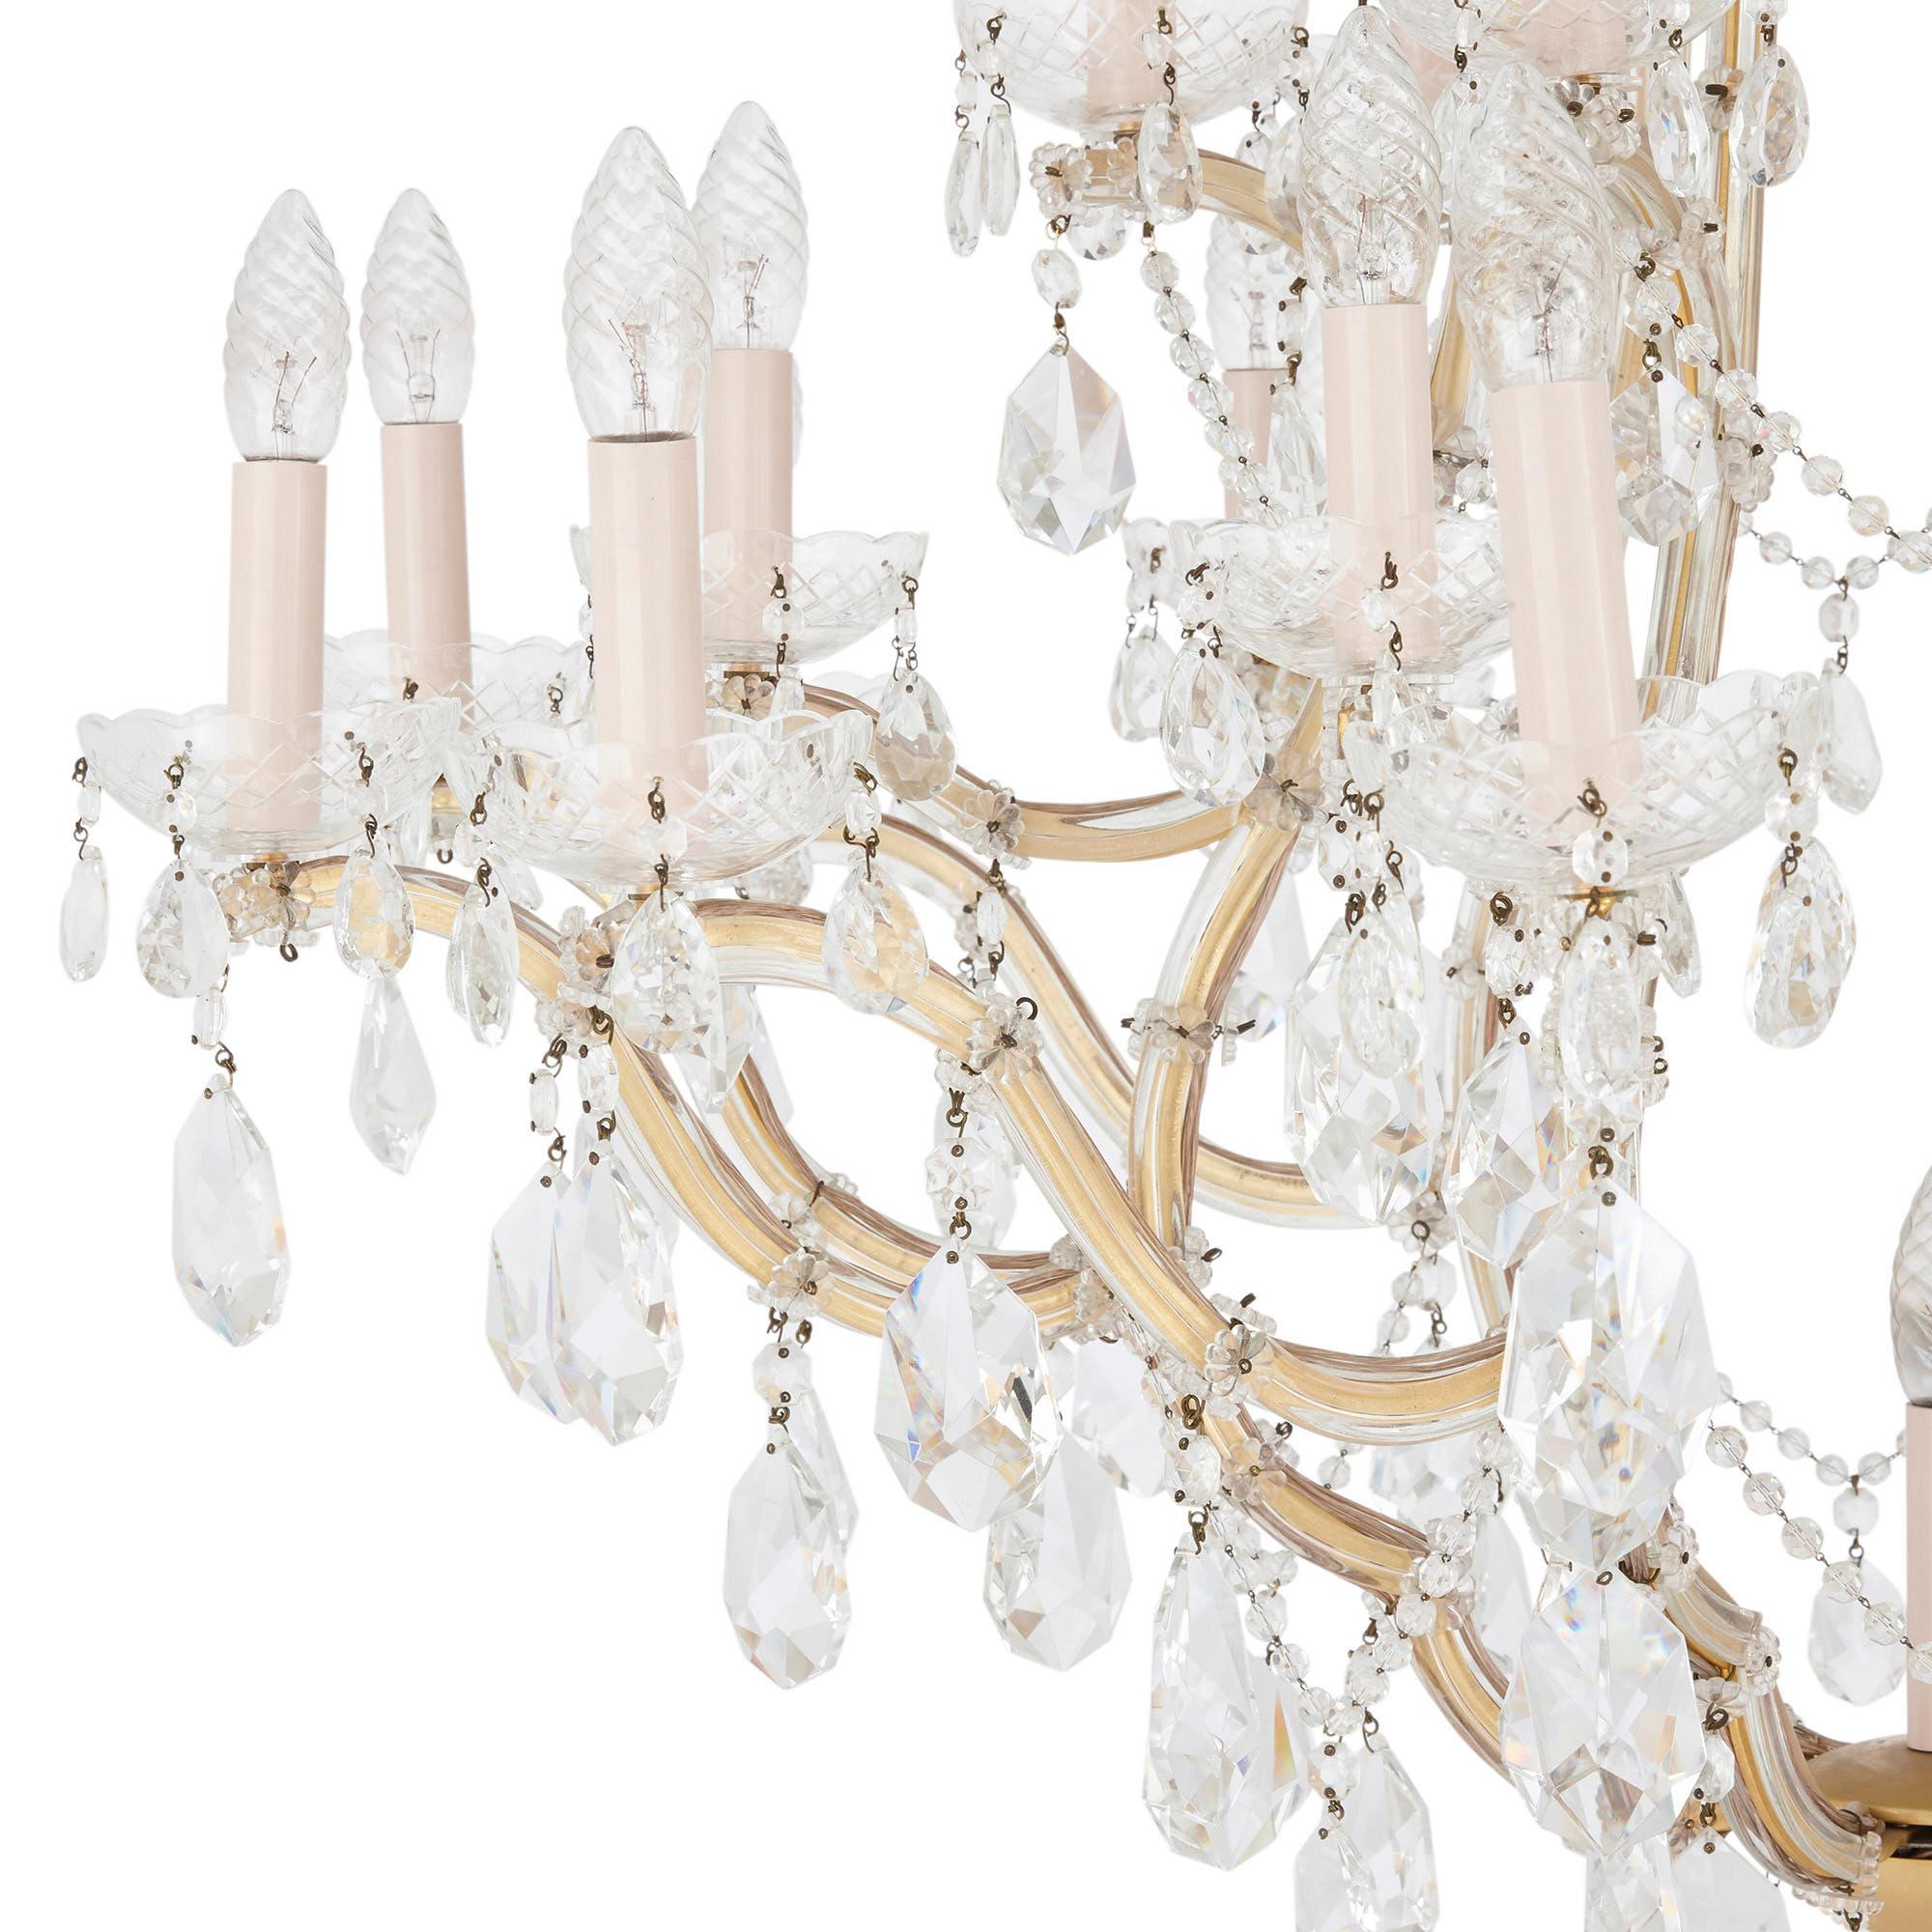 Bohemian chandelier with cut-glass pendants
Bohemian, 20th century
Measures: Height 130 cm, diameter 105 cm

This luxurious chandelier is crafted in the Bohemian manner from wonderfully faceted cut glass. The chandelier features twenty-five